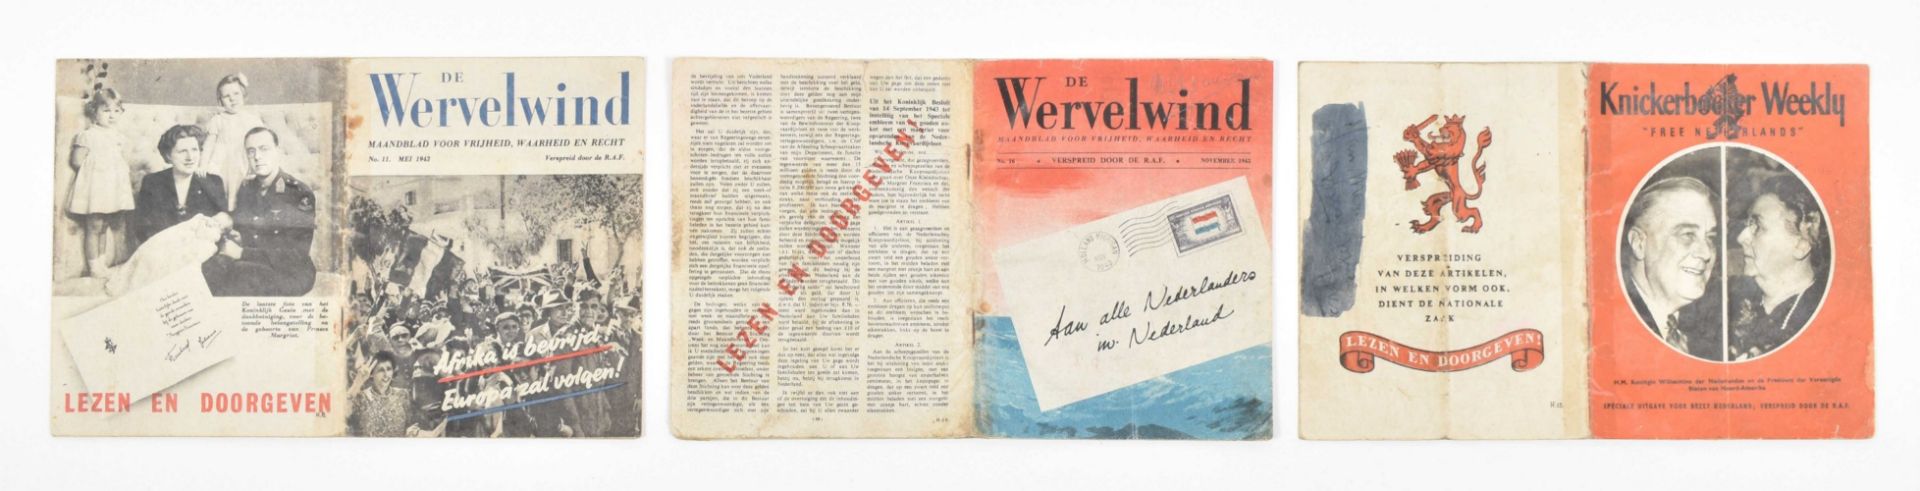 Collection of approx. 100 newspapers, periodicals, etc. publ. 1940-1945 - Image 6 of 9